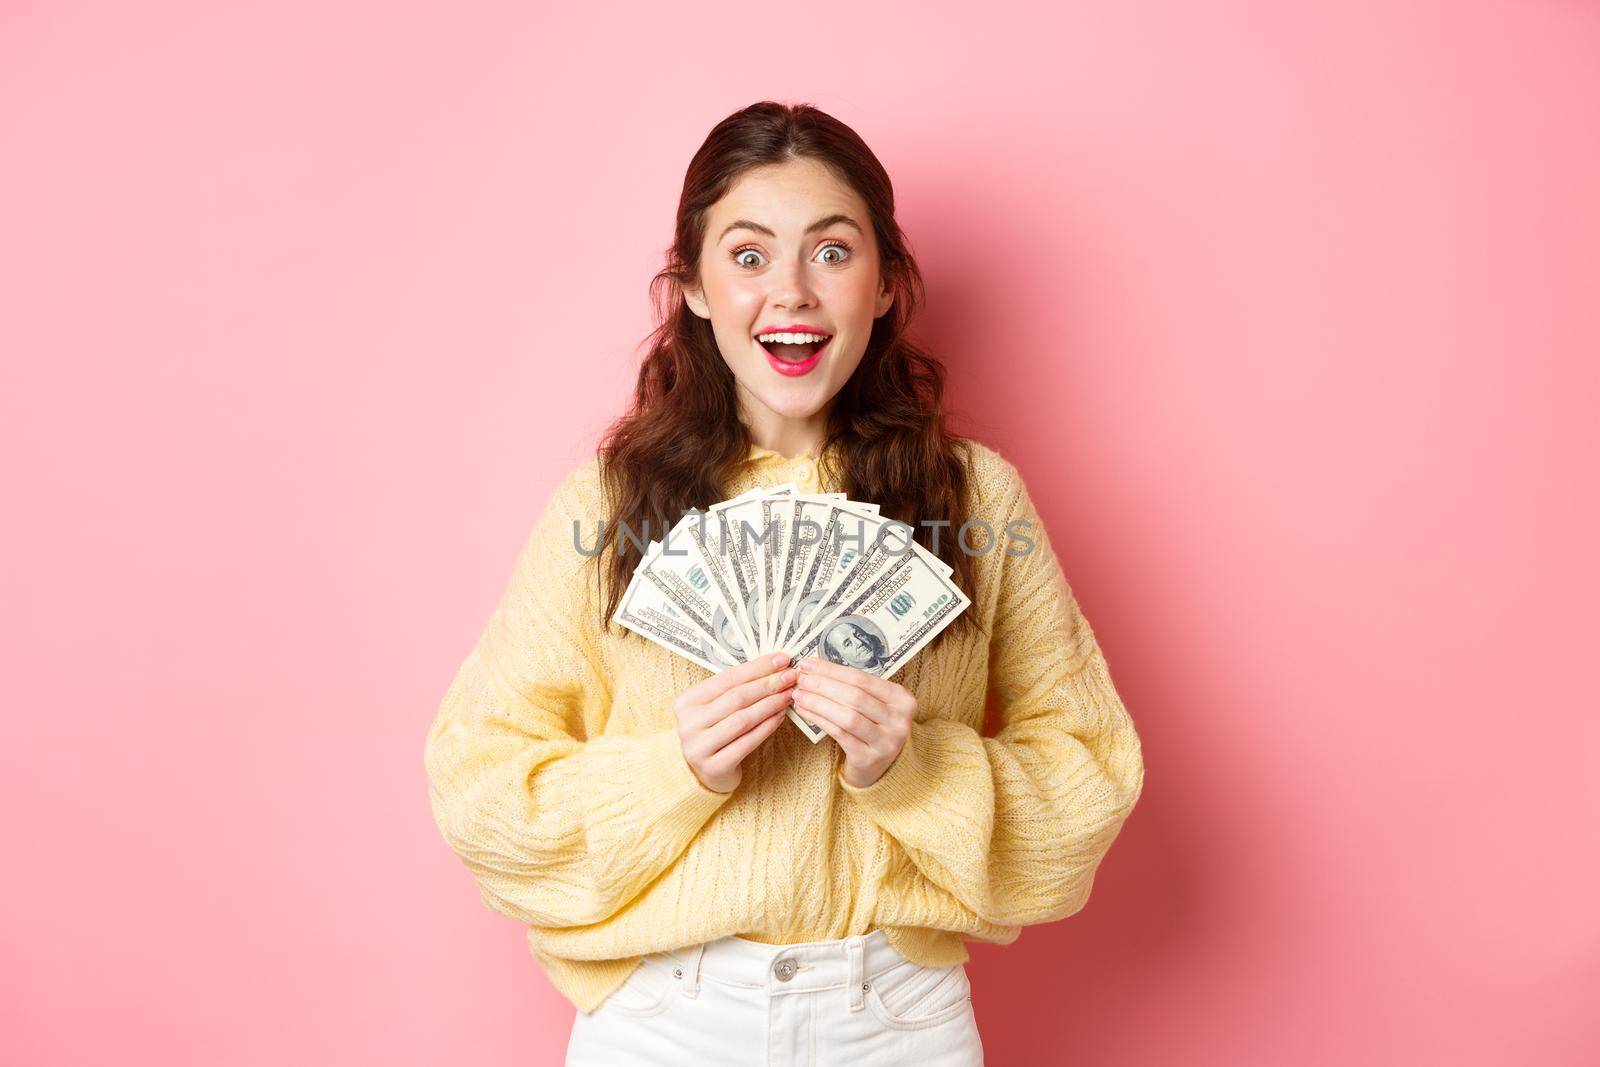 Wow I won. Excited brunette girl showing money and smiling, got her cash prize, holding dollar bills and looking happy, standing over pink background.